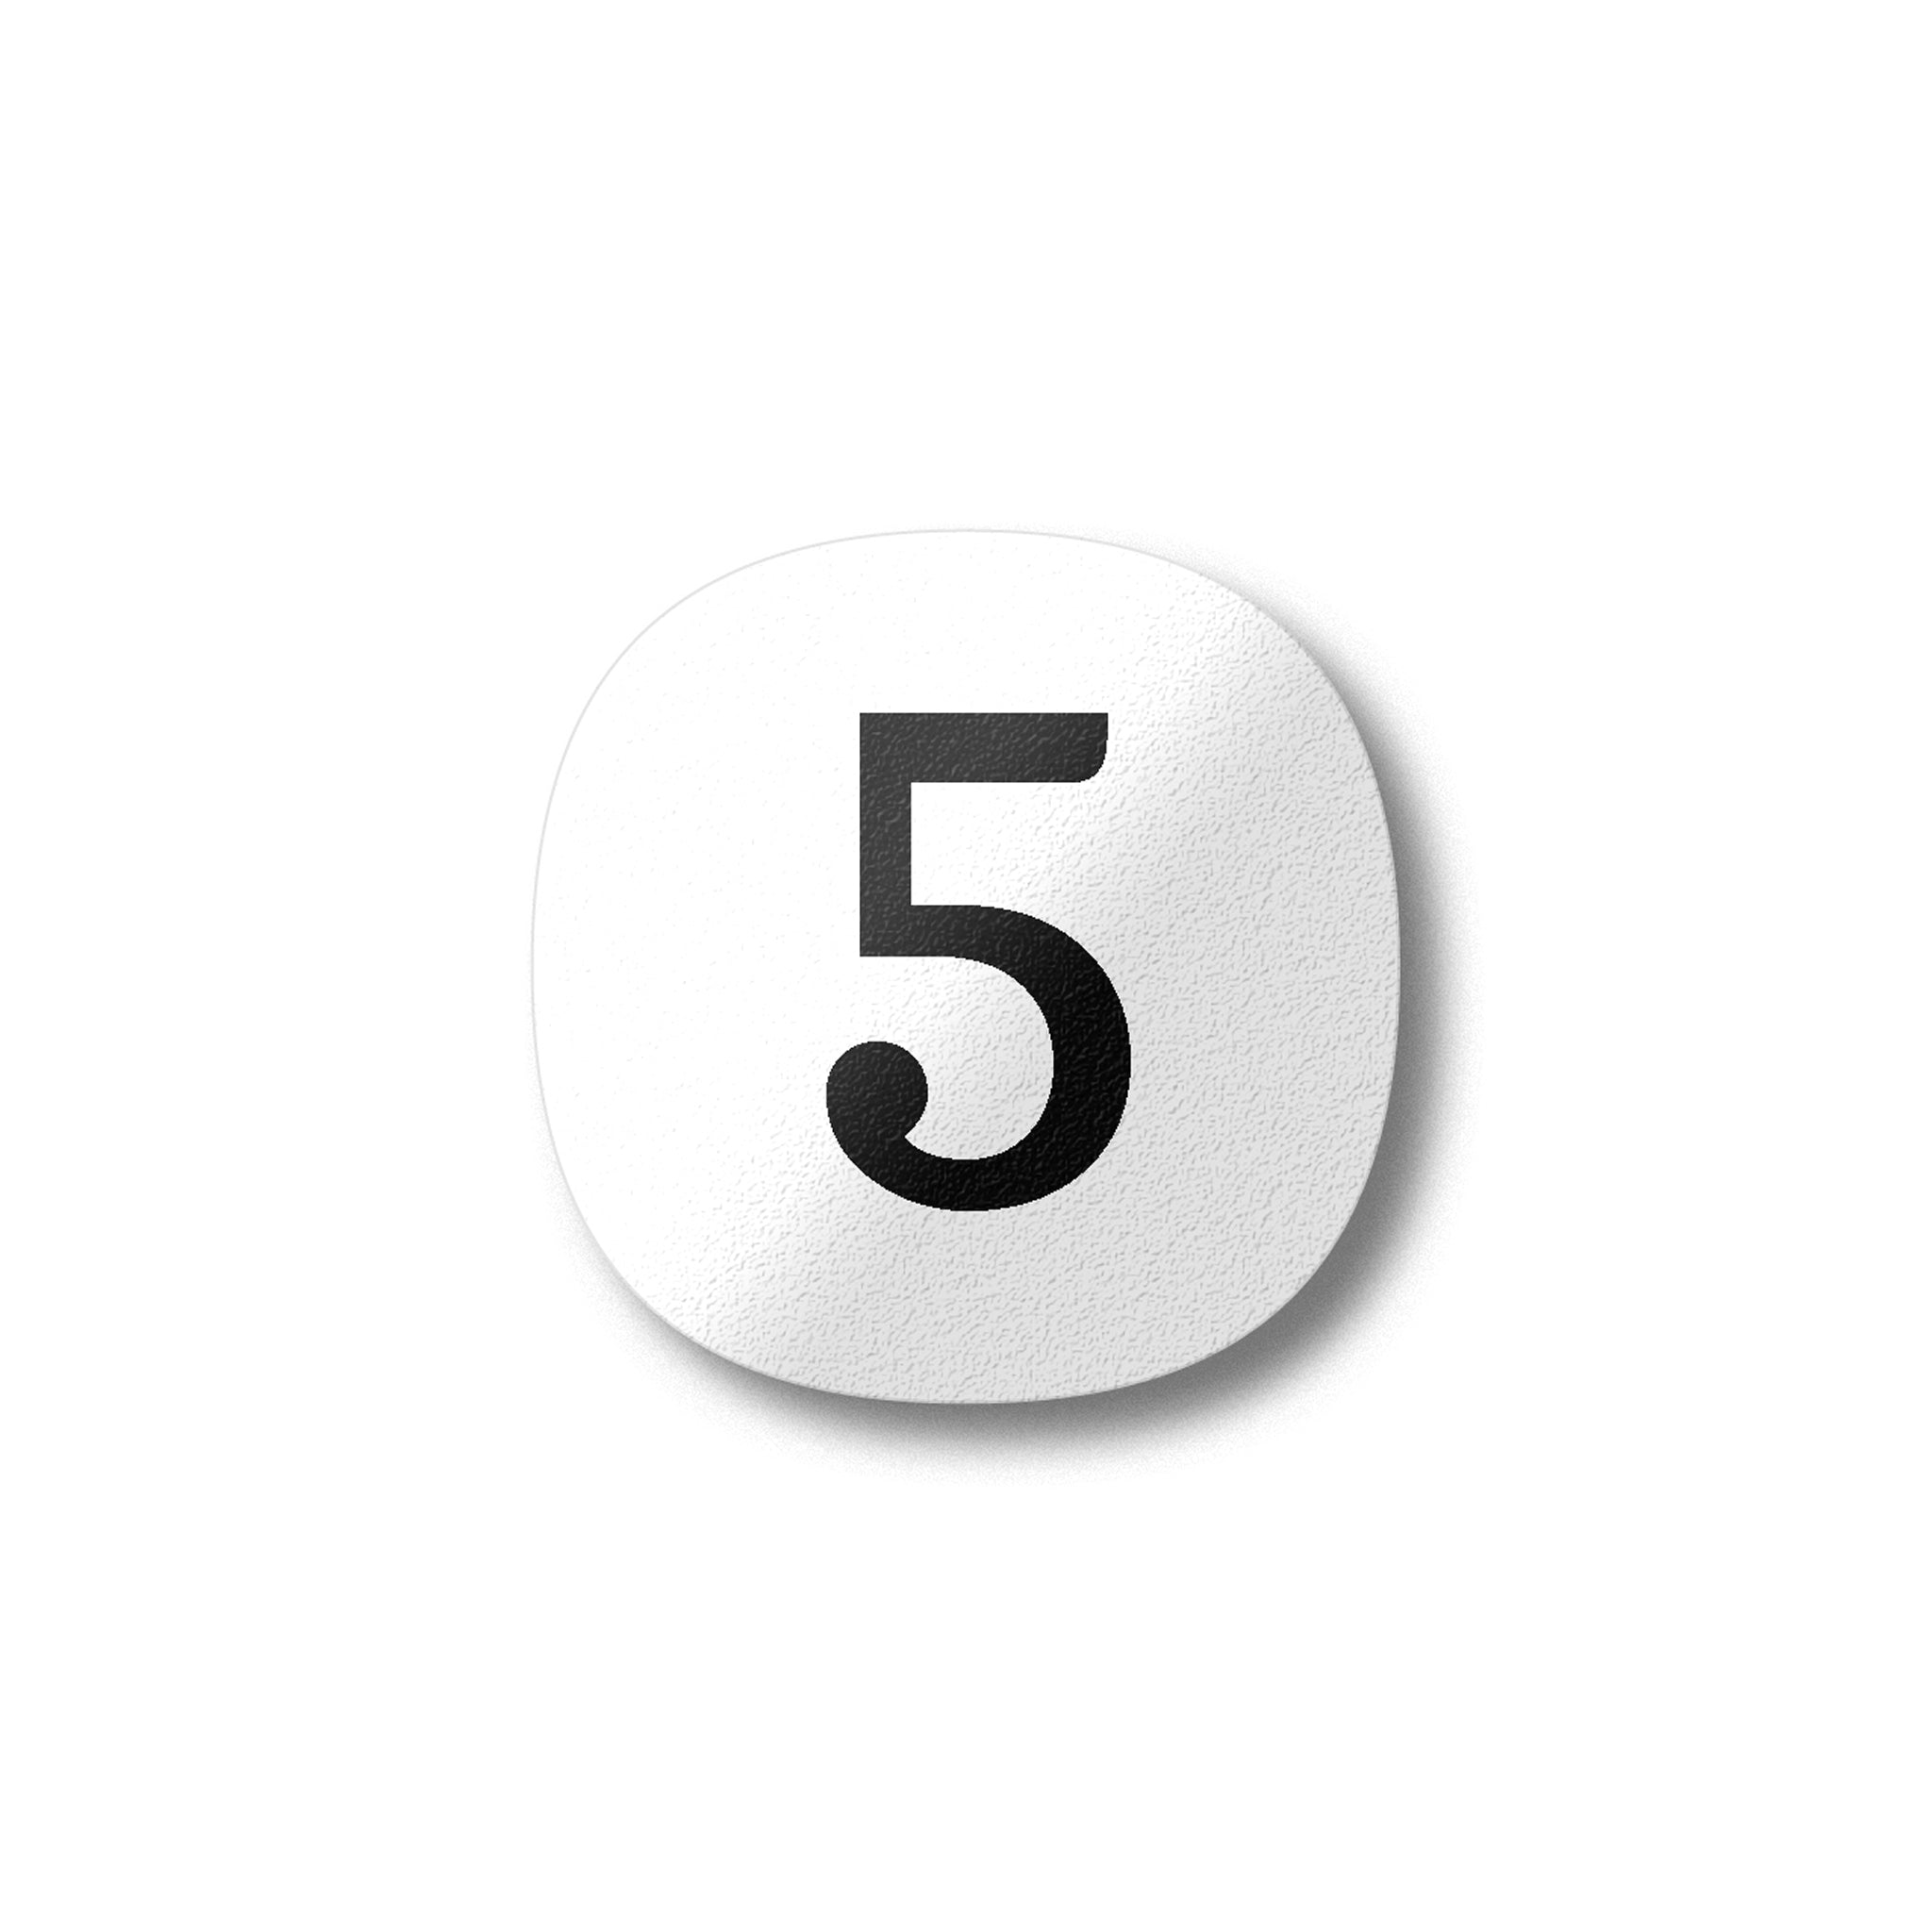 A black number five on a white background design plywood fridge magnet by Beyond the Fridge